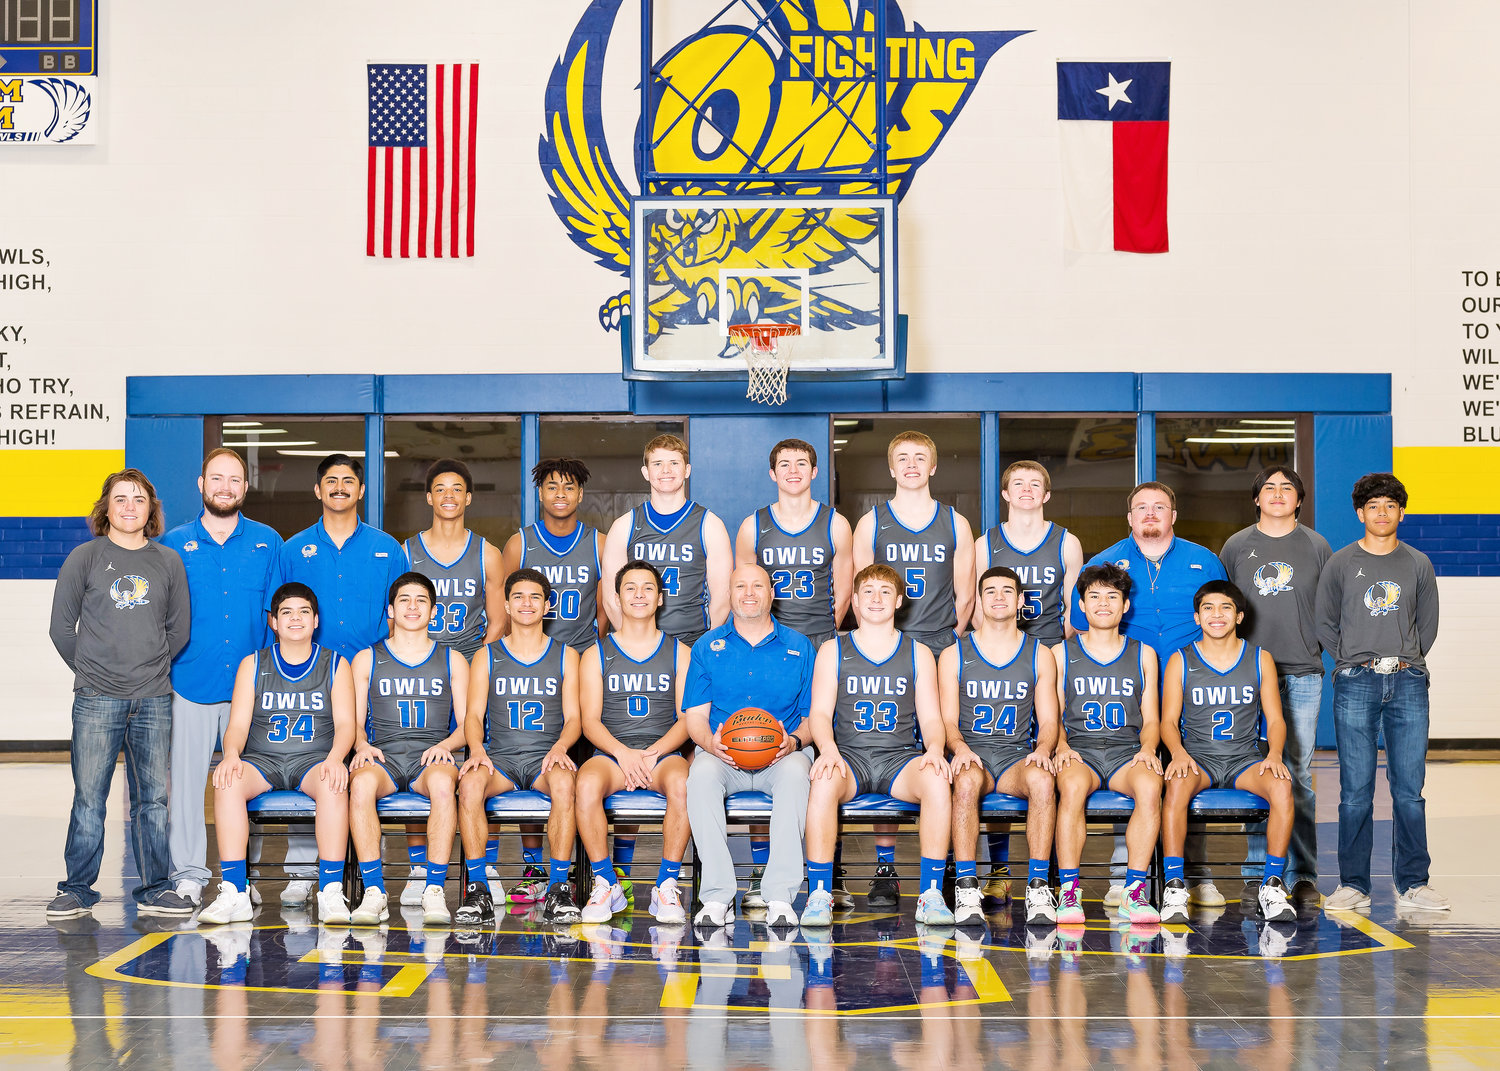 The Reagan County Owls punched their ticket to the Region 1-2A Tournament with their 79-51 win over Seagraves on Friday and a 71-58 win over Plains on Tuesday. They will take on Floydada at 1 p.m. at South Plains College in Levelland on Friday for the Regional Semifinal. Pictured above include: Bottom Row - Johnny Chavez, Eduardo Encinas, Raymond Saldibar, Angel Flores, Head Coach Kyle Brown, Seth Avalos, AJ Avalos, Seth Soto, Angel Martinez. Top Row - Manager Copelan Lemons, Coach Jacob Whitworth, Coach William Rangel, Omrie Johnson, Nick Franklin, Leevi Knight, Kason Brown, Dylan Odom, Jarrett Brown, Coach Baylee Barton, Manager Kaden Galindo and Manager Alfredo Hidalgo.